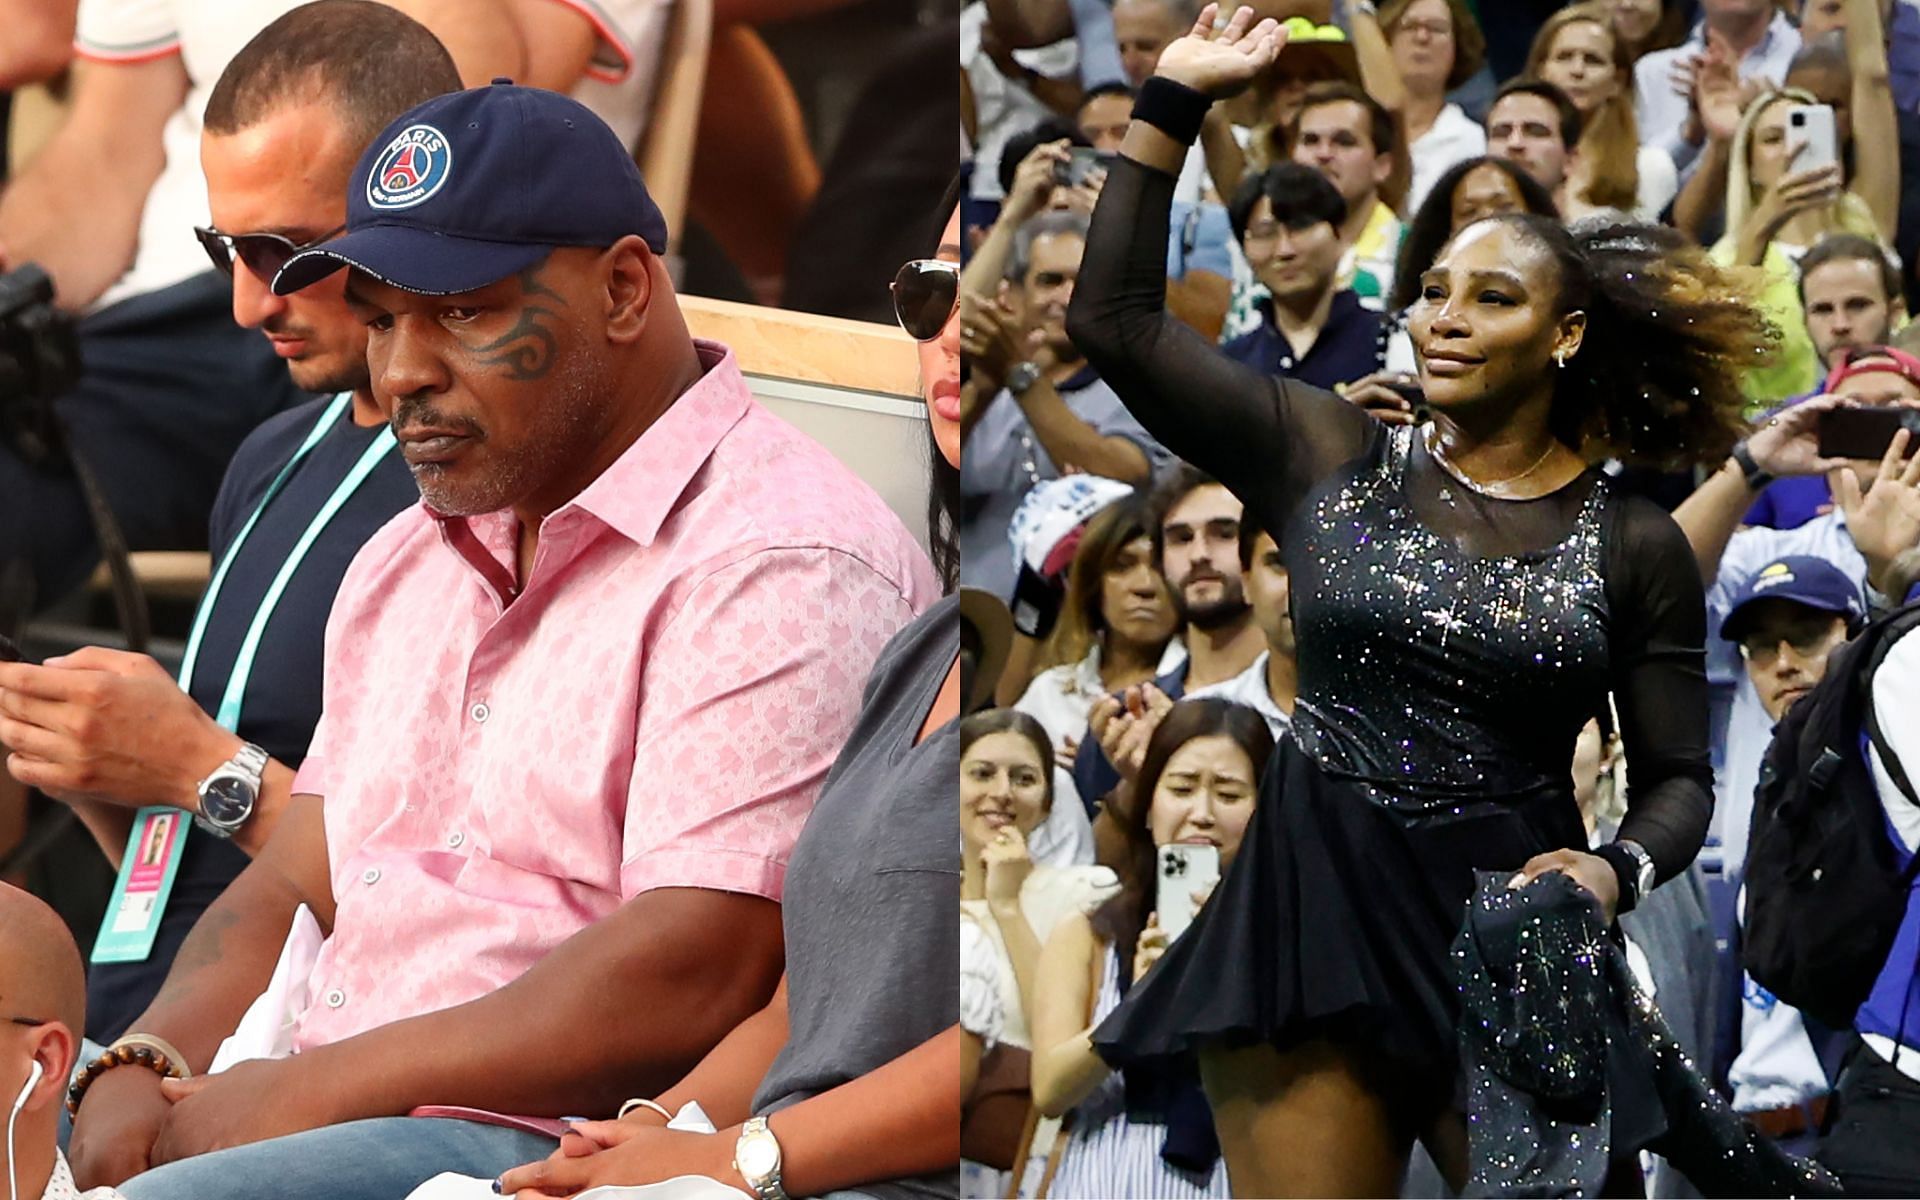 Mike Tyson (left) and Serena Williams (right) (Image credits Getty Images)